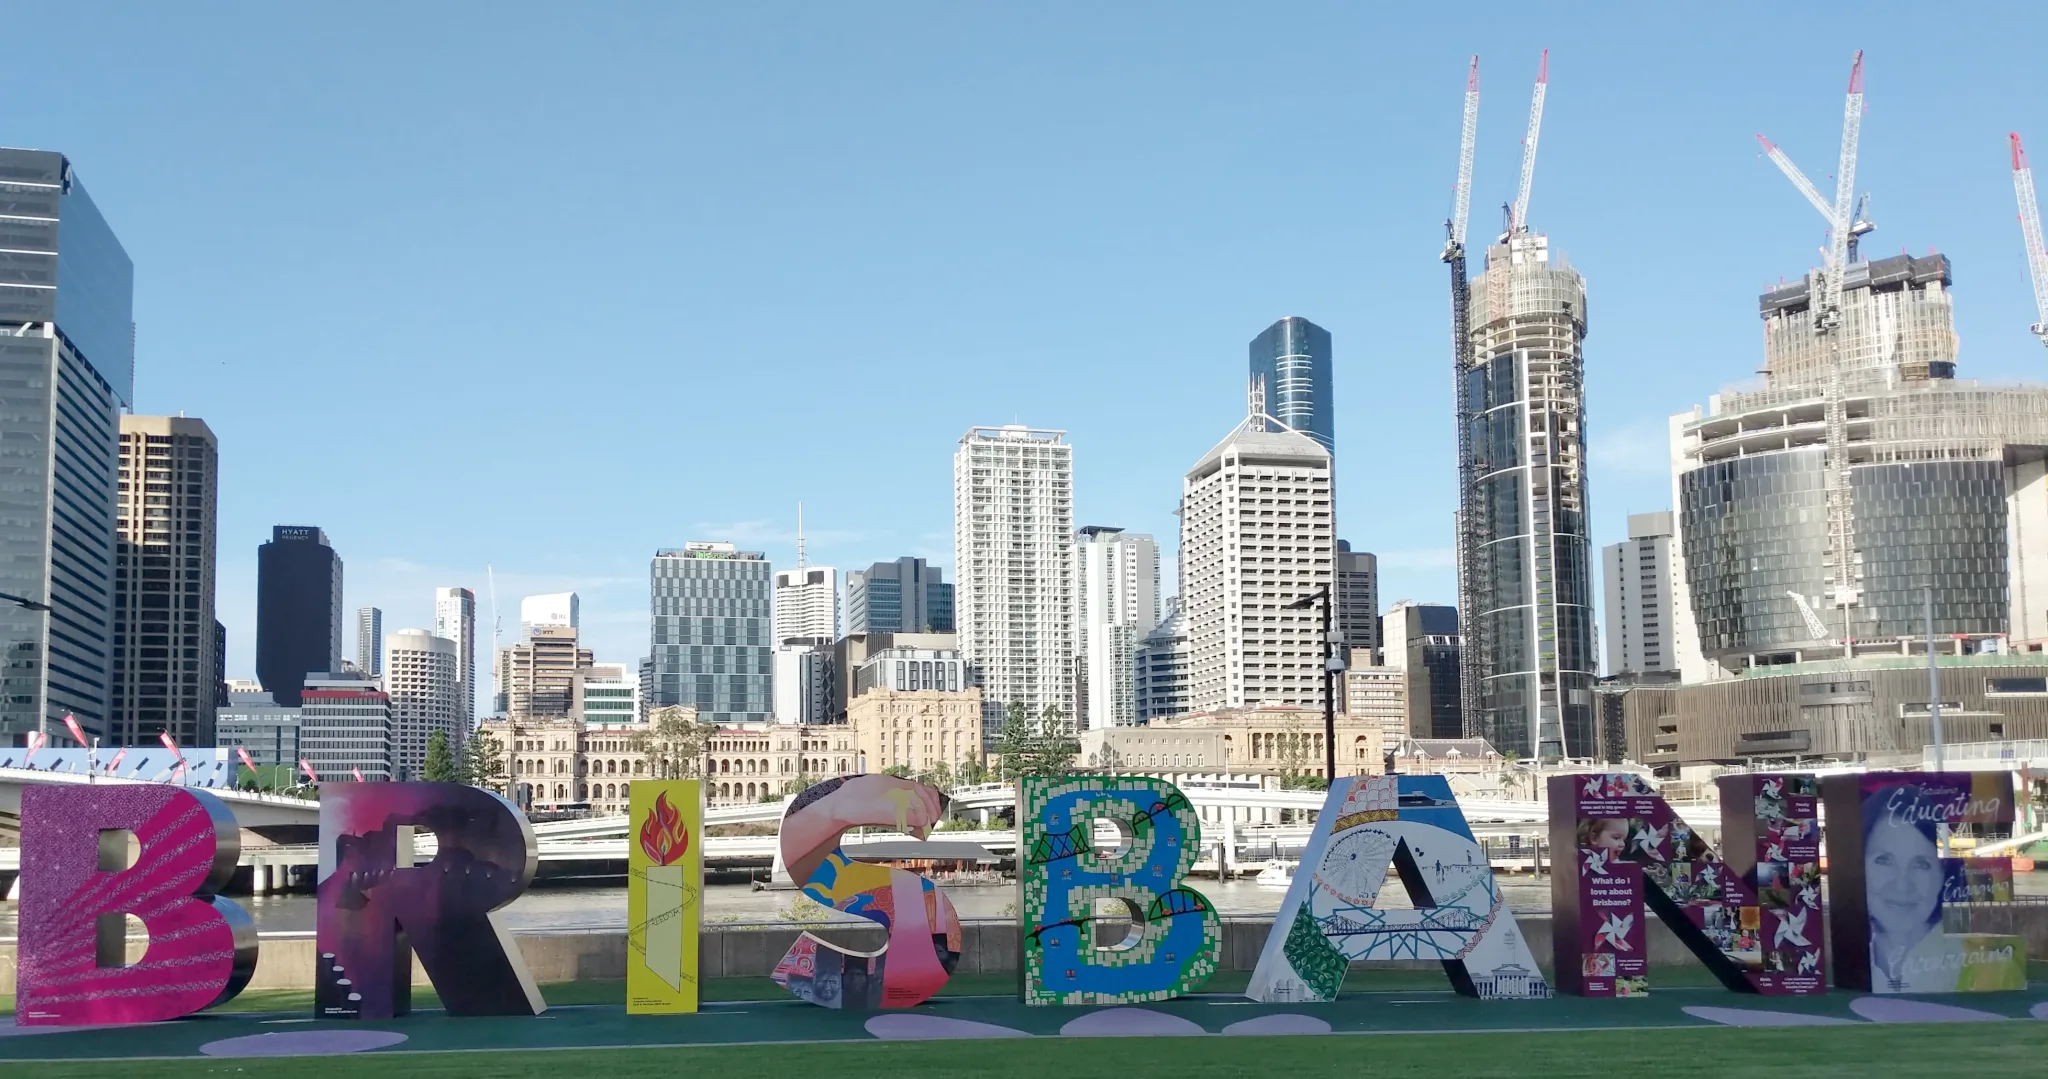 Human-sized free-standing letters
spell out BRISBANE by the river, Hollywood-style. These ones are decorated.
In the background, skyscrapers are visible on the far bank.